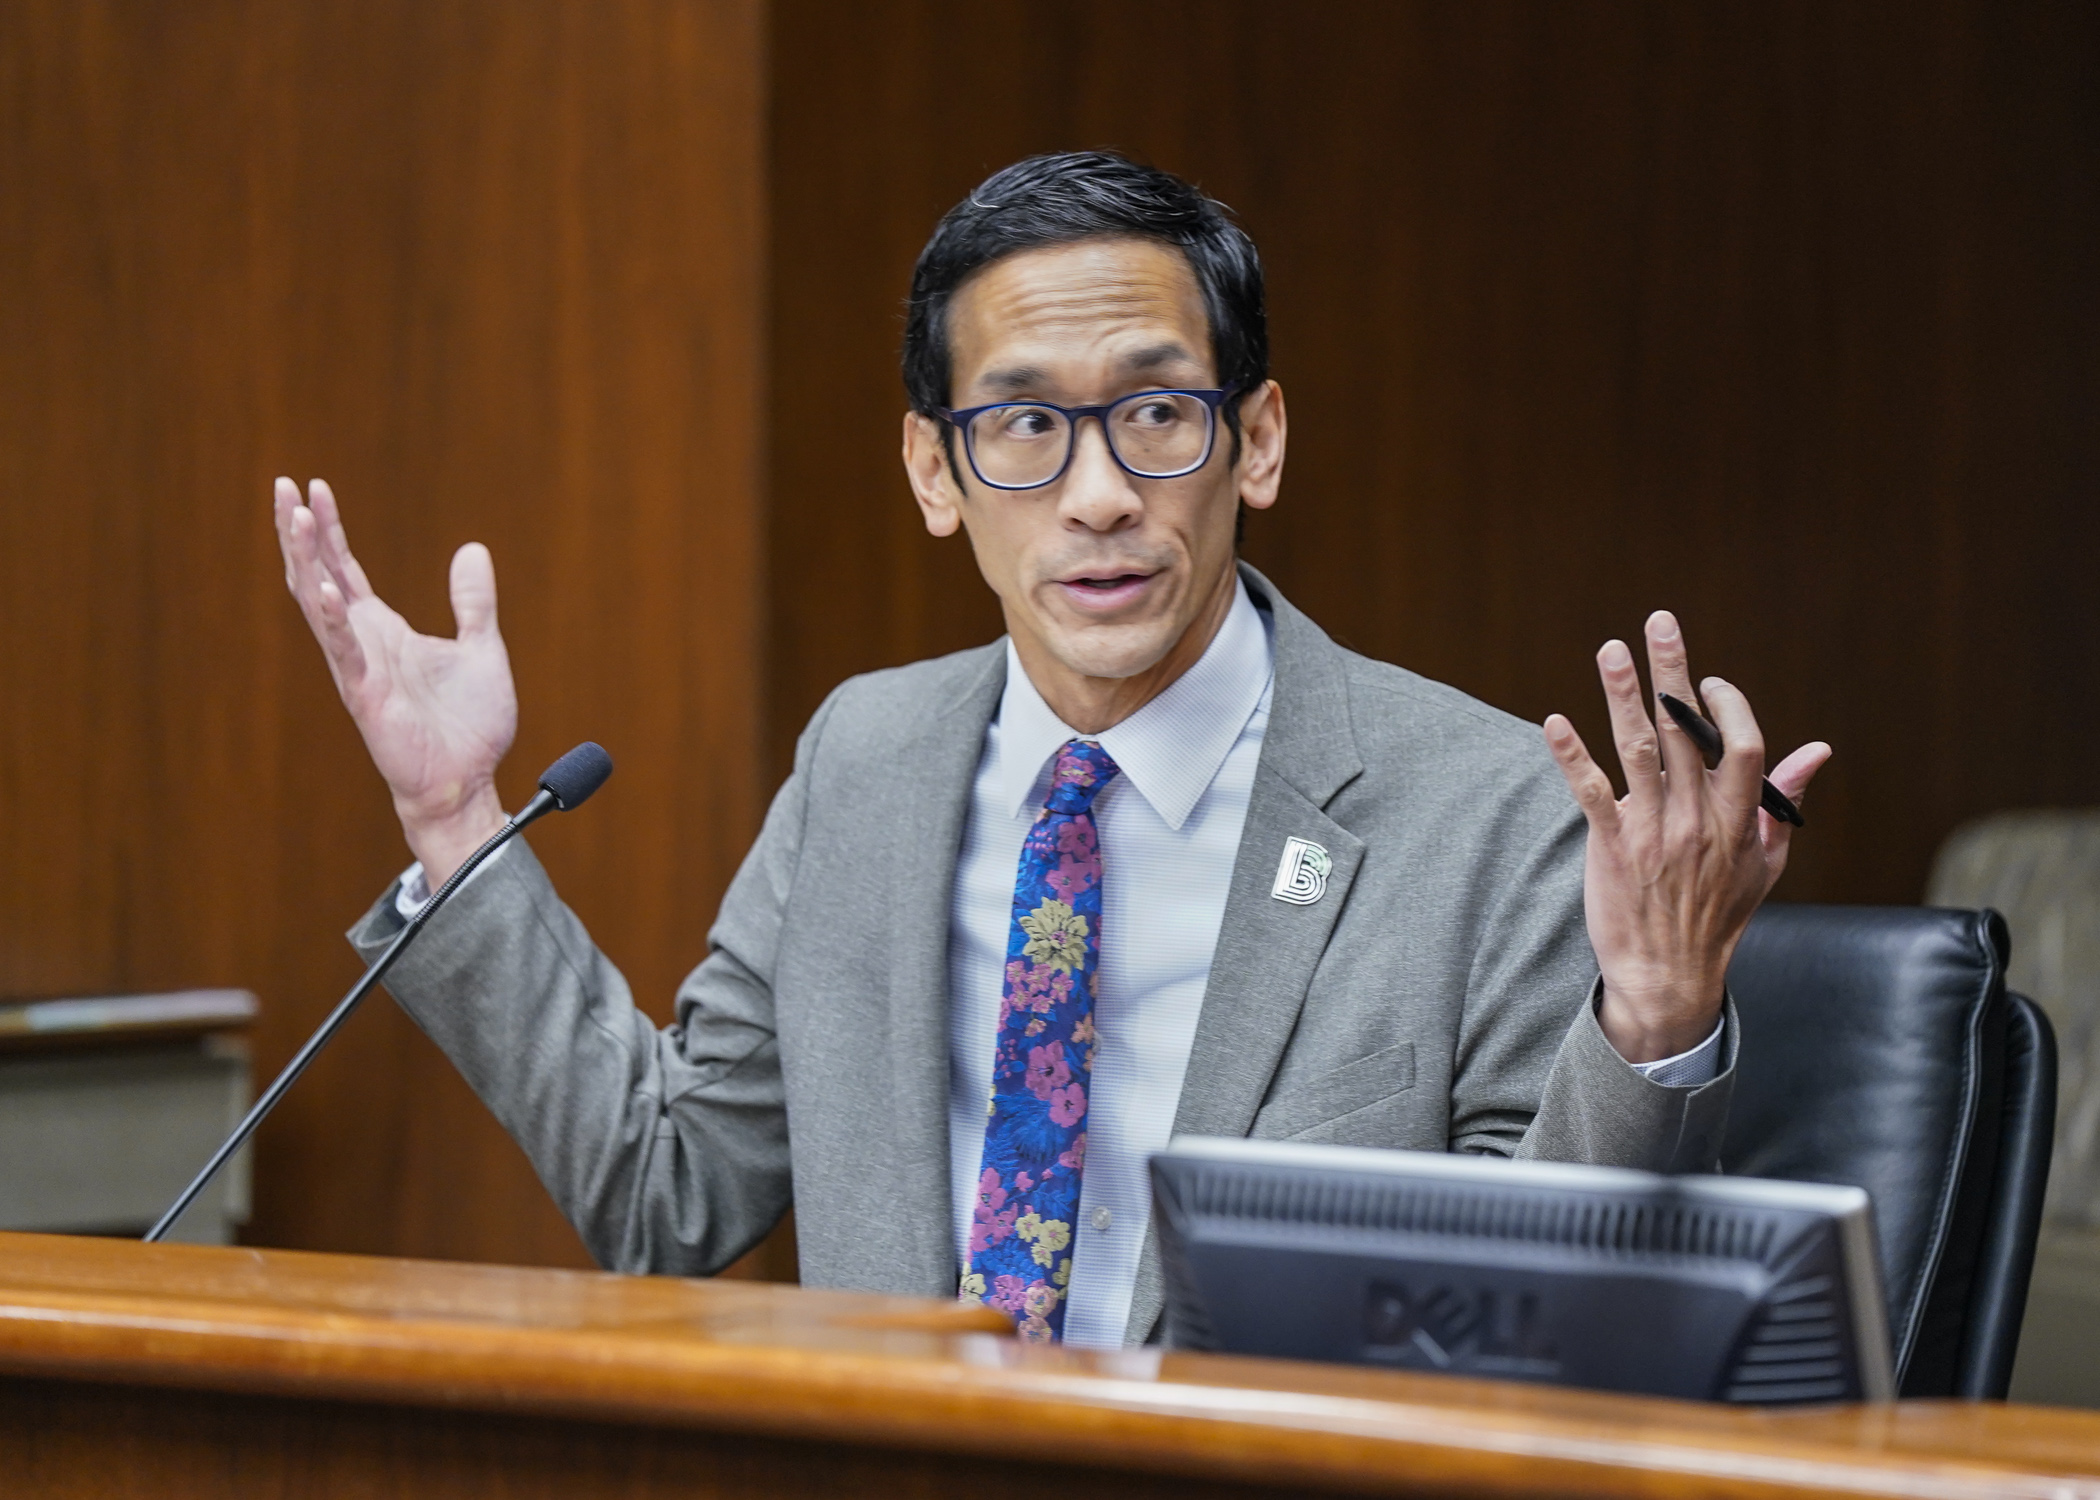 Pat Sukhum, CEO of Big Brothers Big Sisters Twin Cities, thanks members of the House's workforce development committee March 29 for continuing to fund and support the mentoring program through HF2233, the committee’s omnibus bill. (Photo by Catherine Davis)